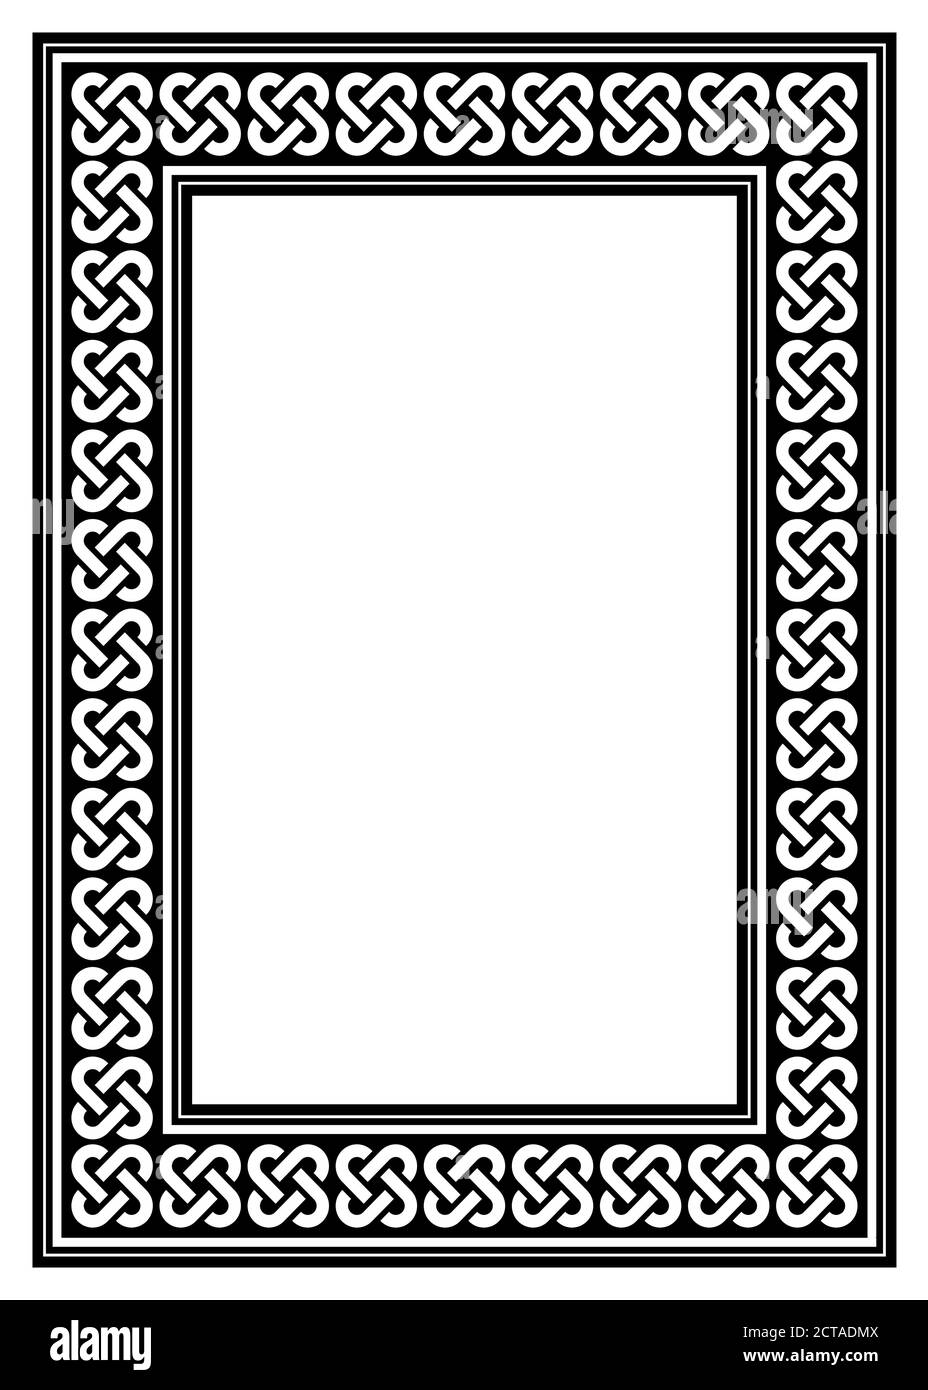 Celtic Irish frame vector design, ractangle braided pattern in 5x7 format perfect for greeting card or wedding invitation Stock Vector